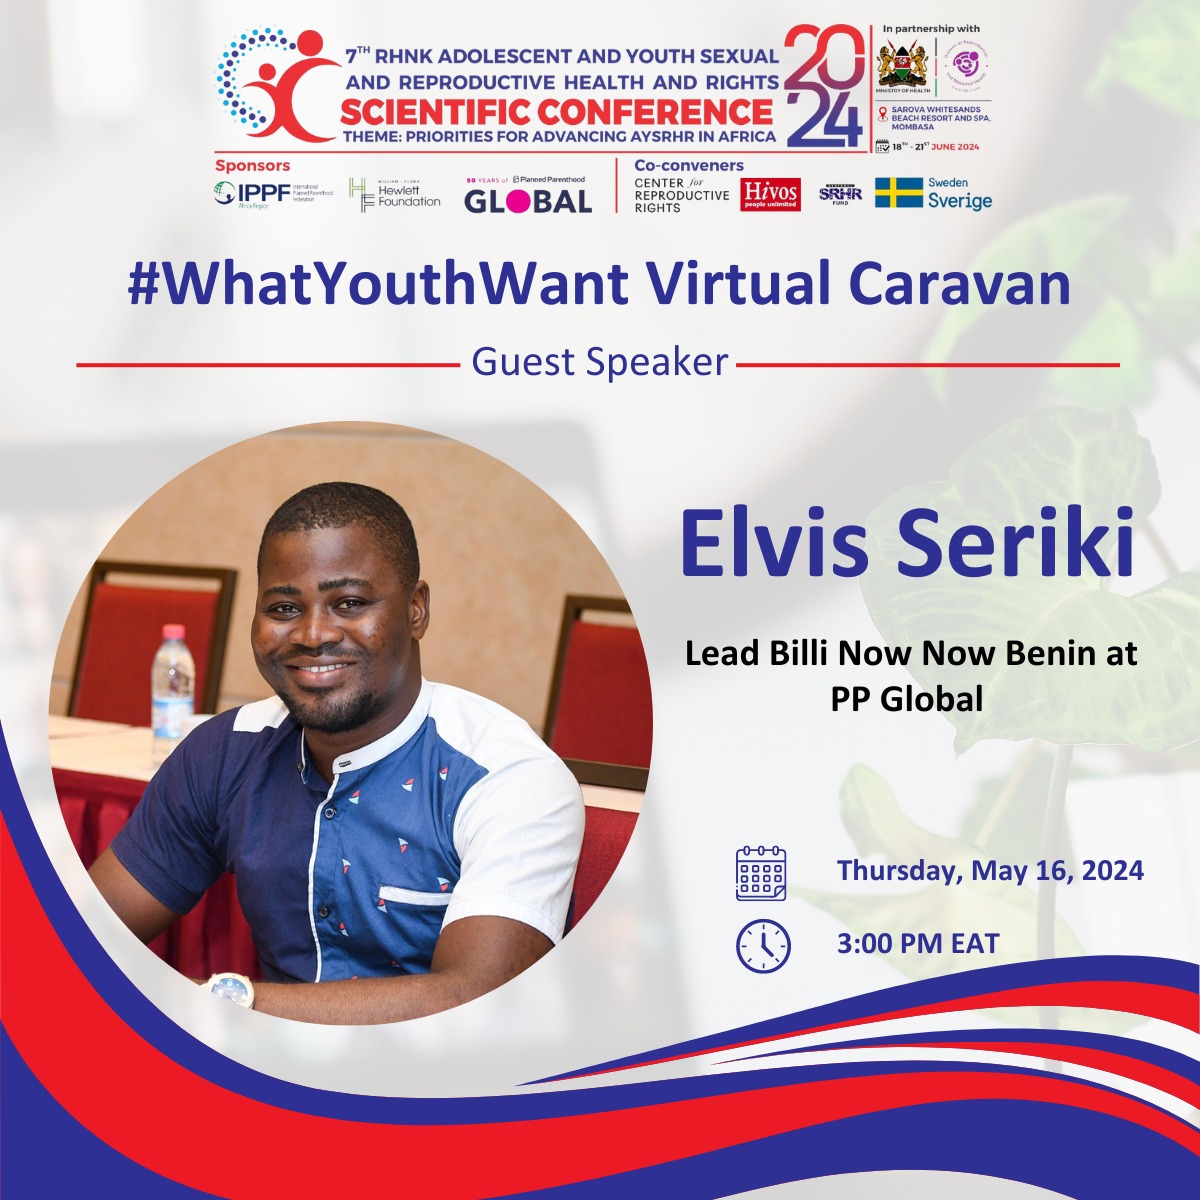 Mr. @Elvis_SERIKI, from Benin, under @ppglobe, will be speaking at our virtual caravan.
Join us as we get nourished by his vast experience in Leadership & Governance in AYP's SRHR, register now to secure your spot!
us02web.zoom.us/meeting/regist…
#WhatYouthWant
#RHNKConference2024